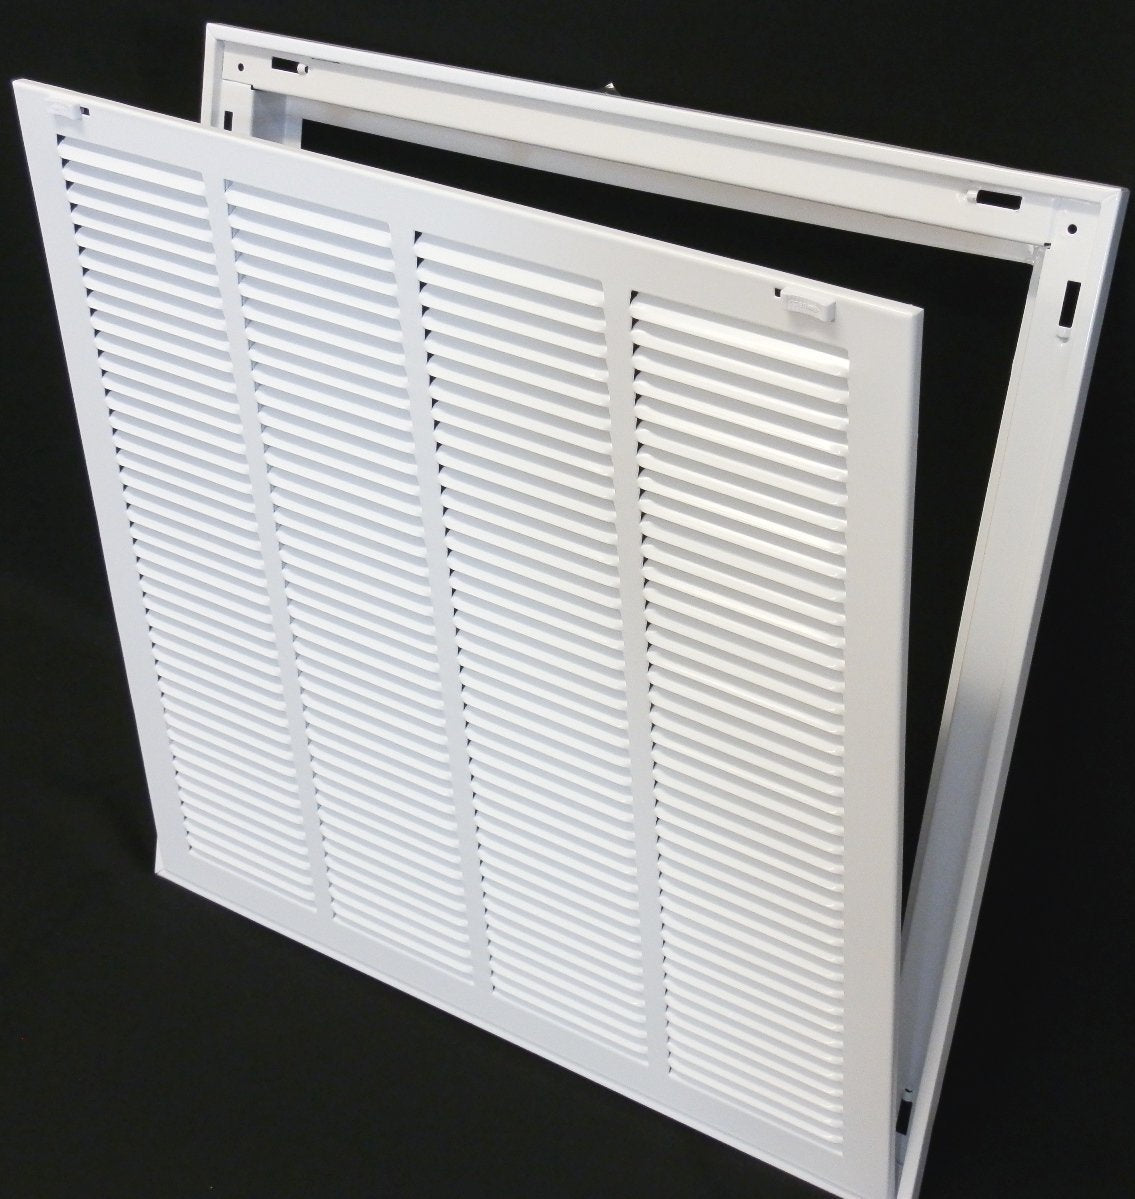 30&quot; X 28&quot; Steel Return Air Filter Grille for 1&quot; Filter - Removable Frame - [Outer Dimensions: 32 5/8&quot; X 30 5/8&quot;]